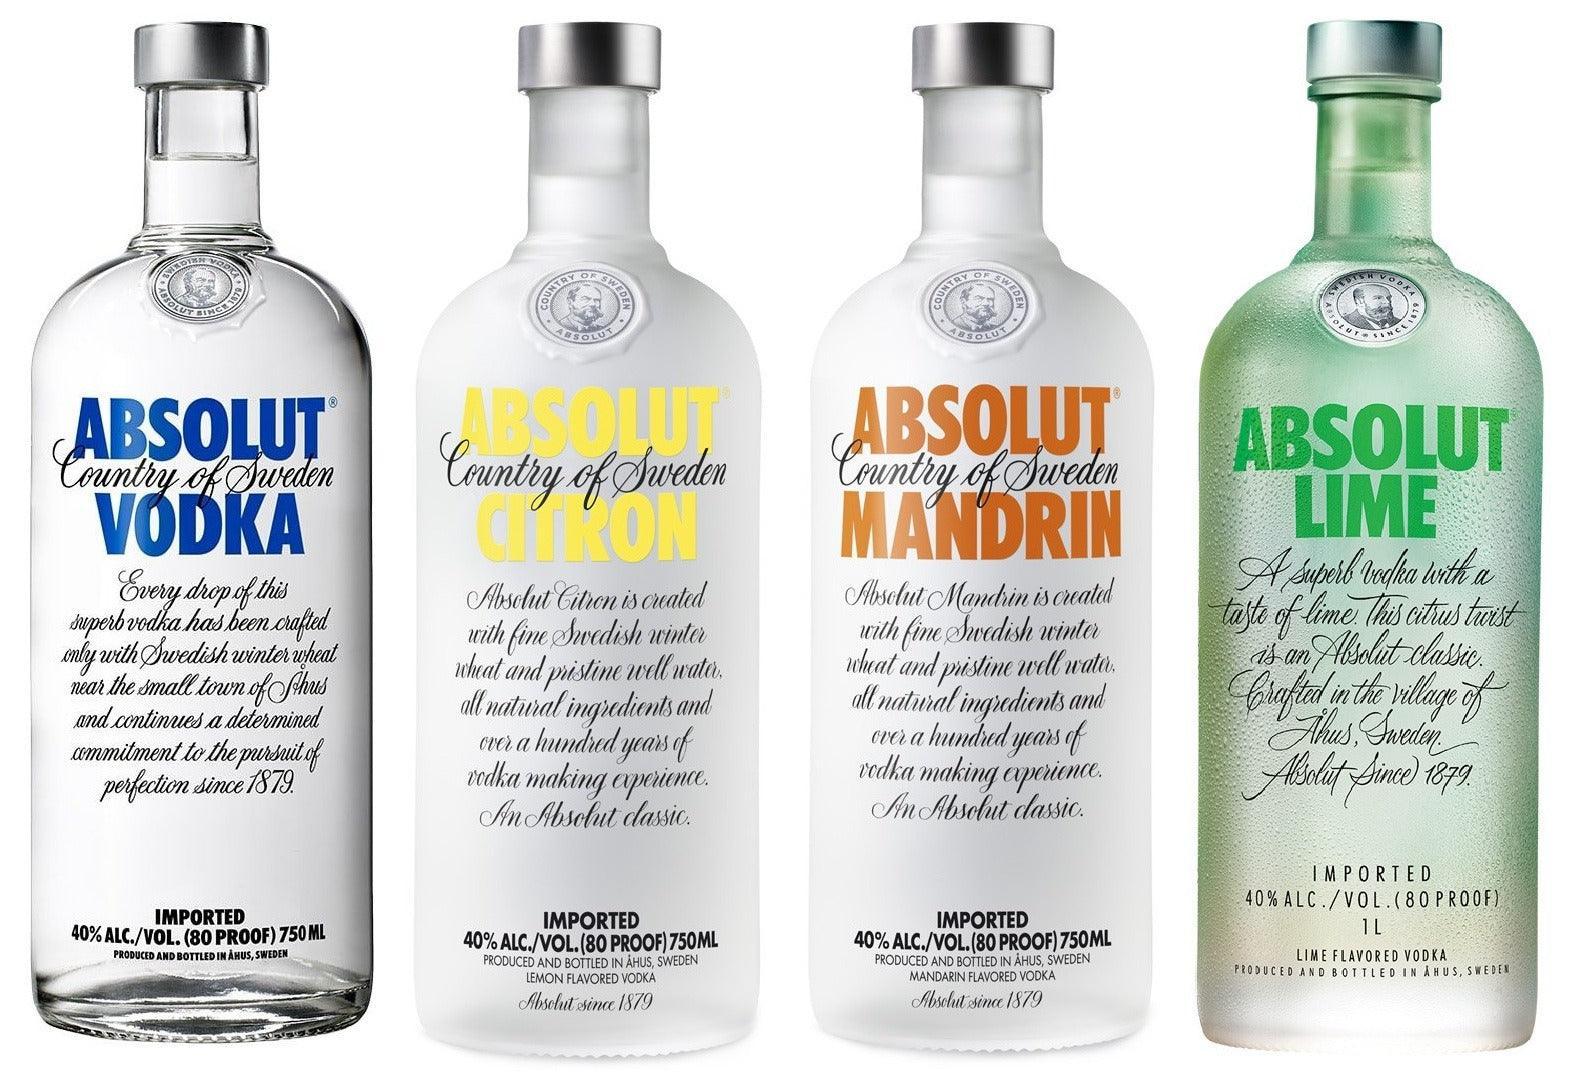 ABSOLUT VODKA COLLECTION (4 BOTTLES) - $74.99 - $125 Free Shipping